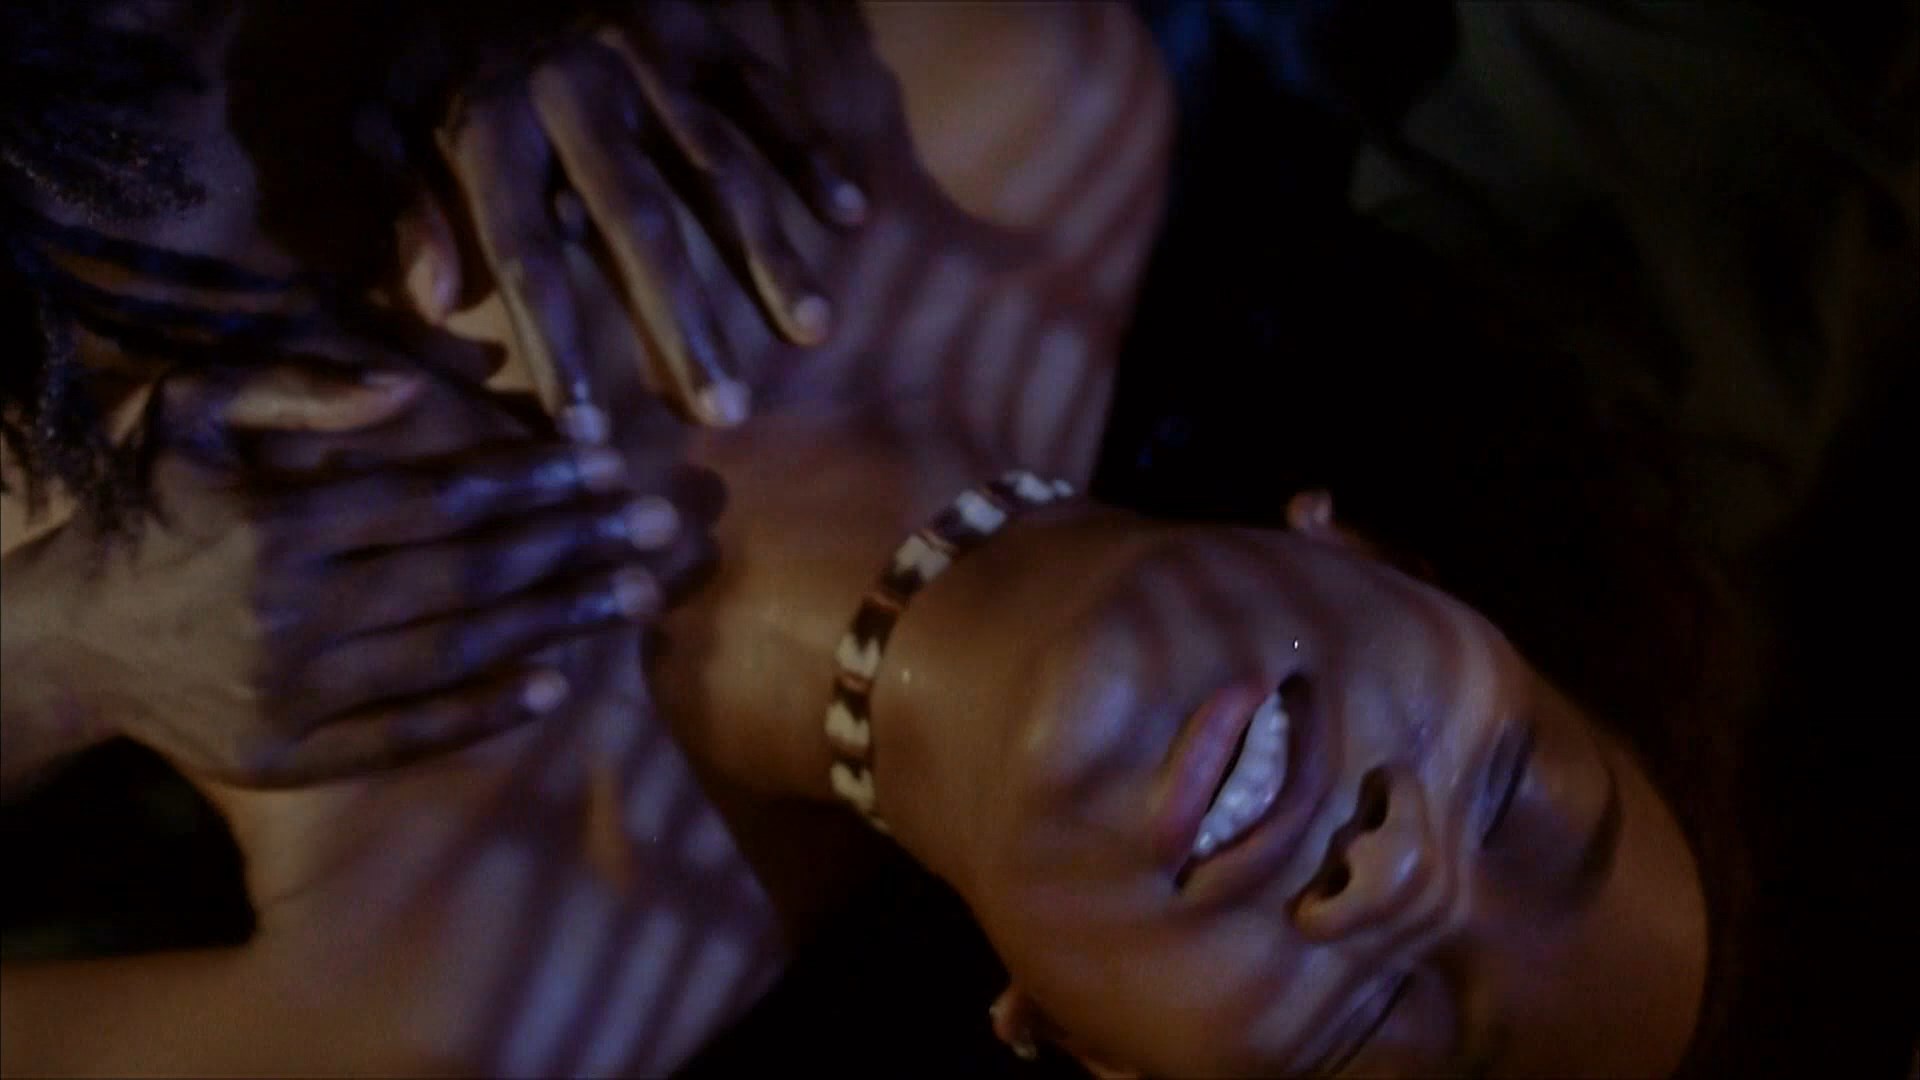 Sonja sohn naked - The Wire Nude Scenes, Pics & Clips ready to watch.